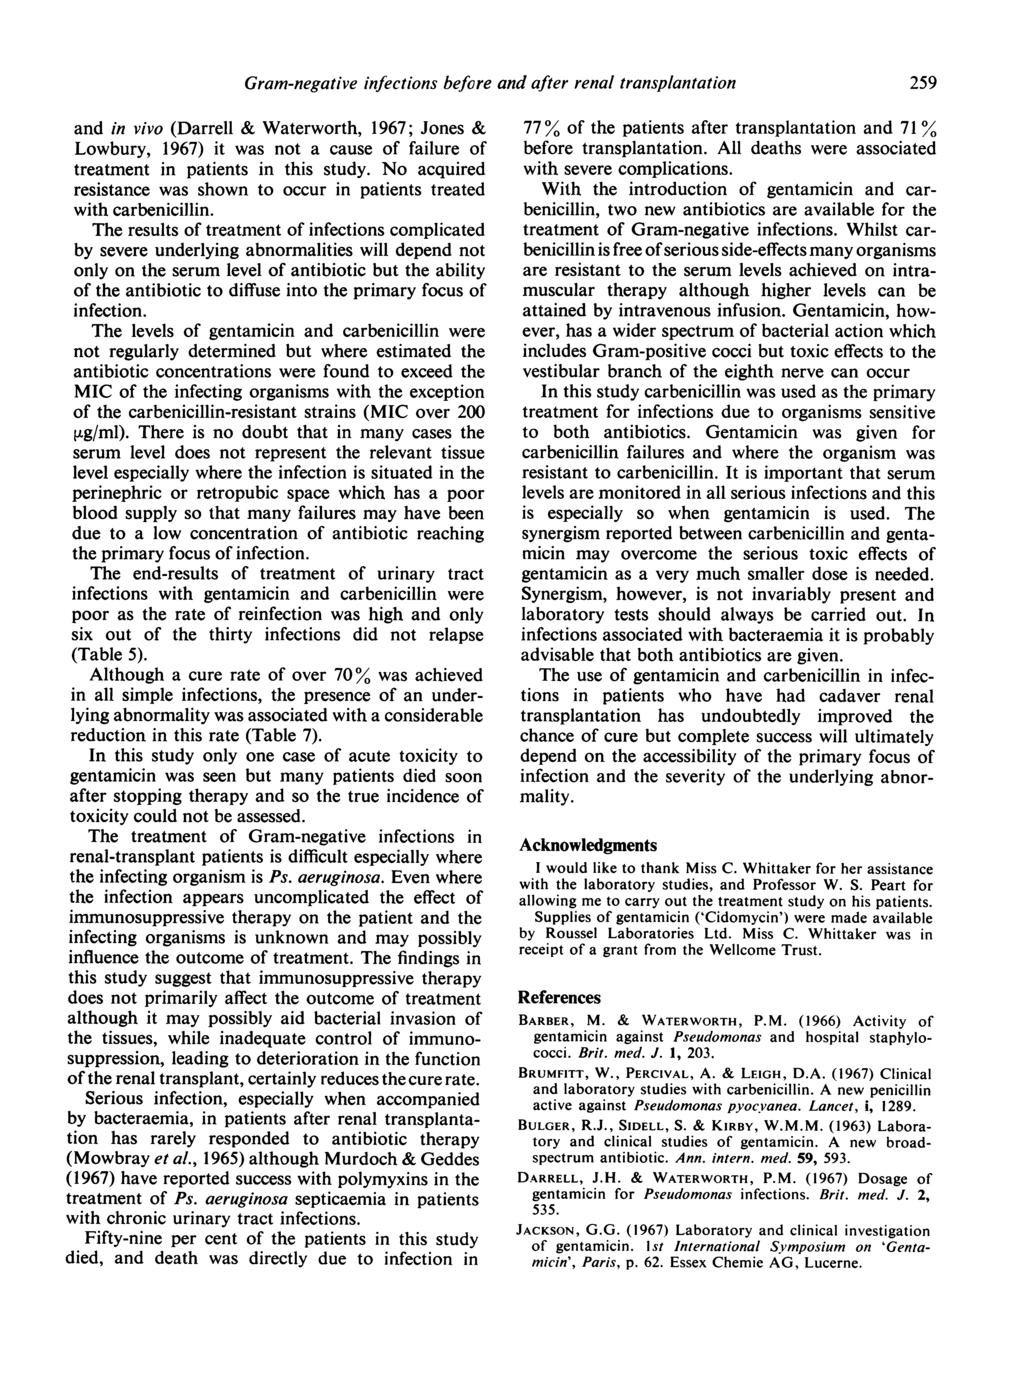 Gram-negative infections before and after renal transplantation 259 and in vivo (Darrell & Waterworth, 1967; Jones & Lowbury, 1967) it was not a cause of failure of treatment in patients in this